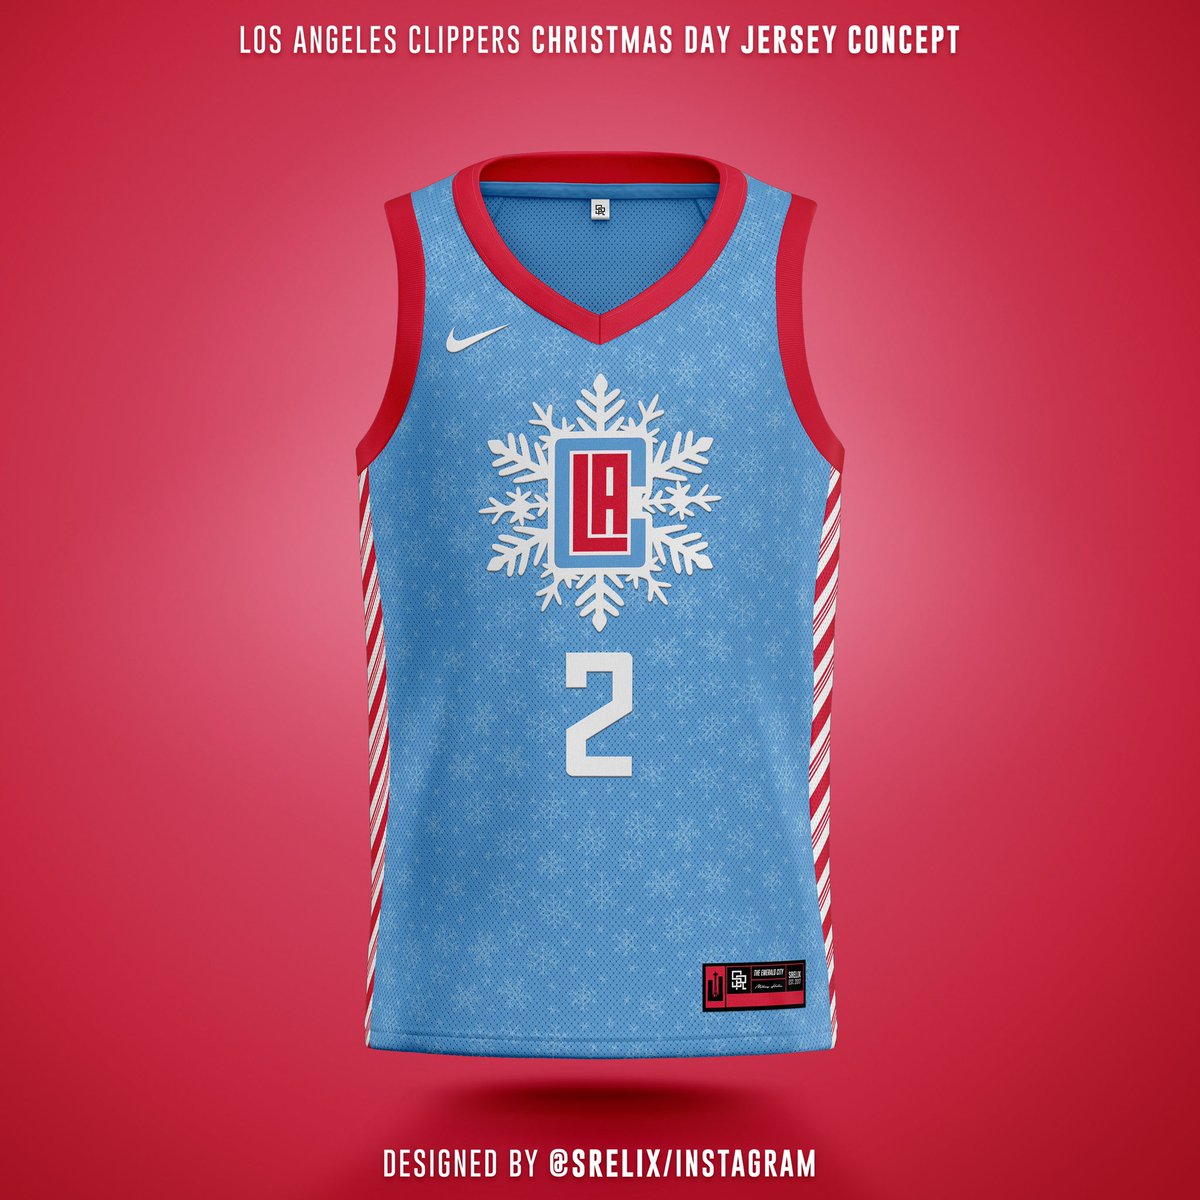 SRELIX - @laclippers x @nuggets Christmas Jersey Concepts